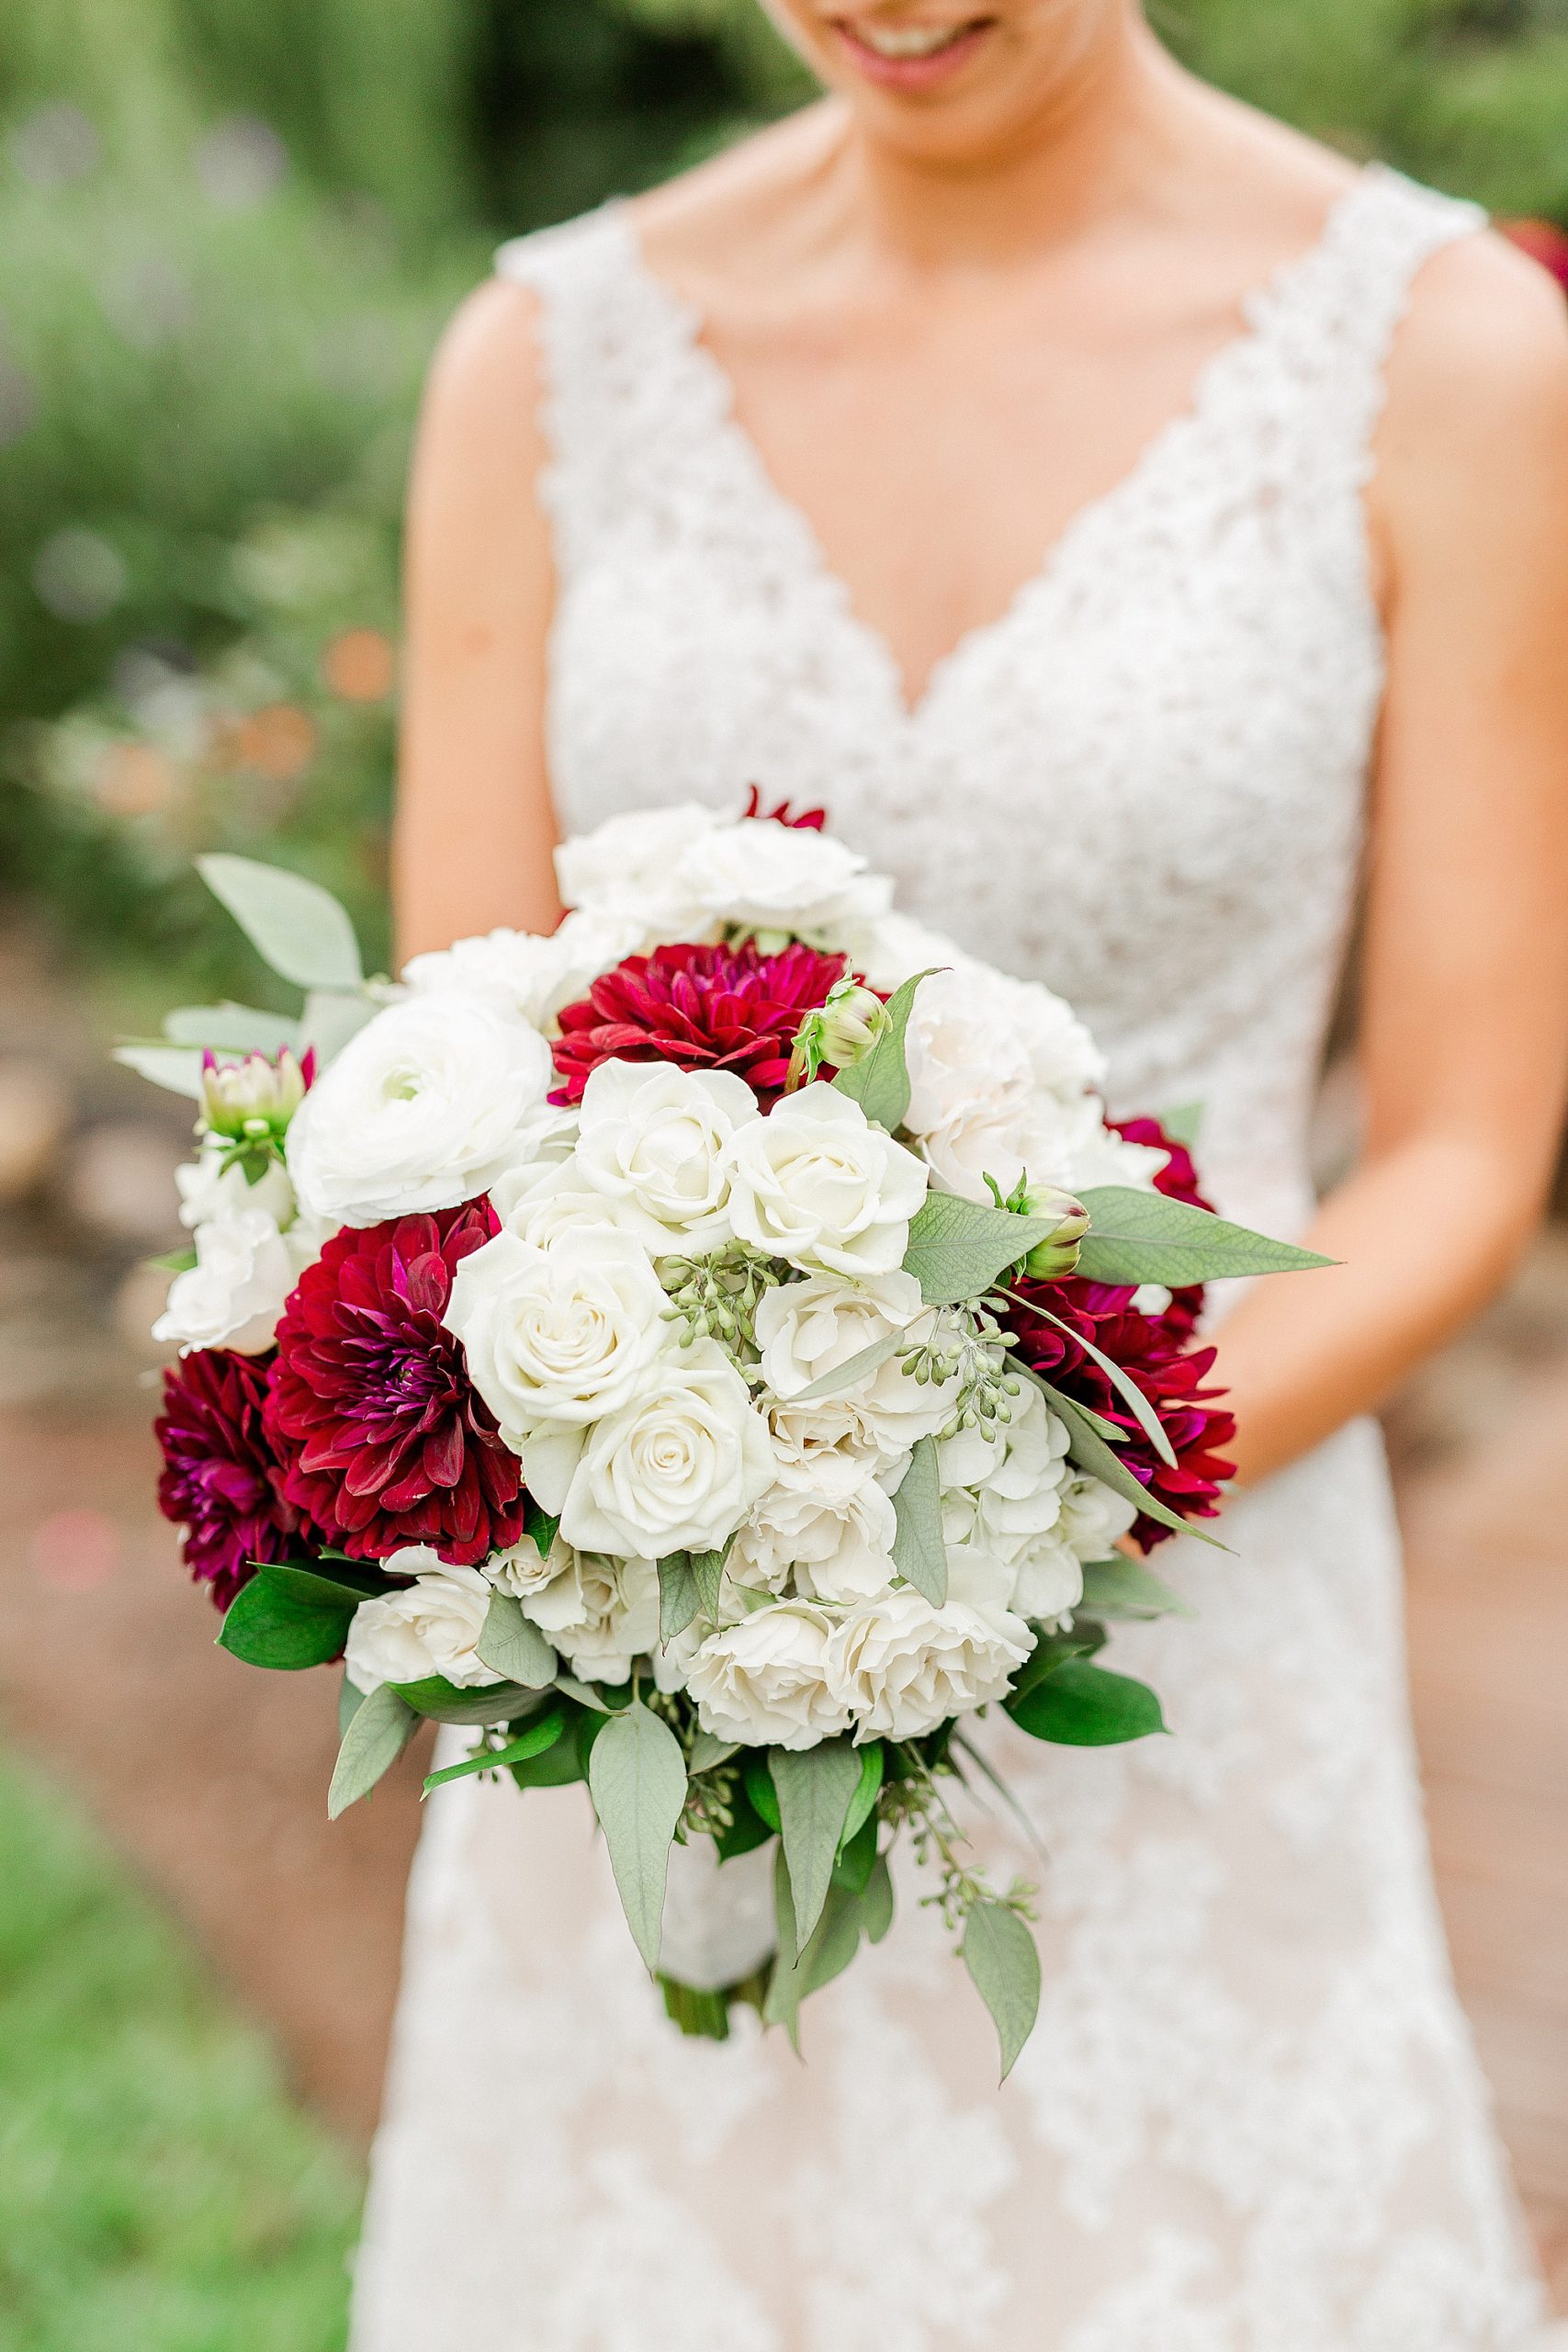 bride holds bouquet of white and red flowers